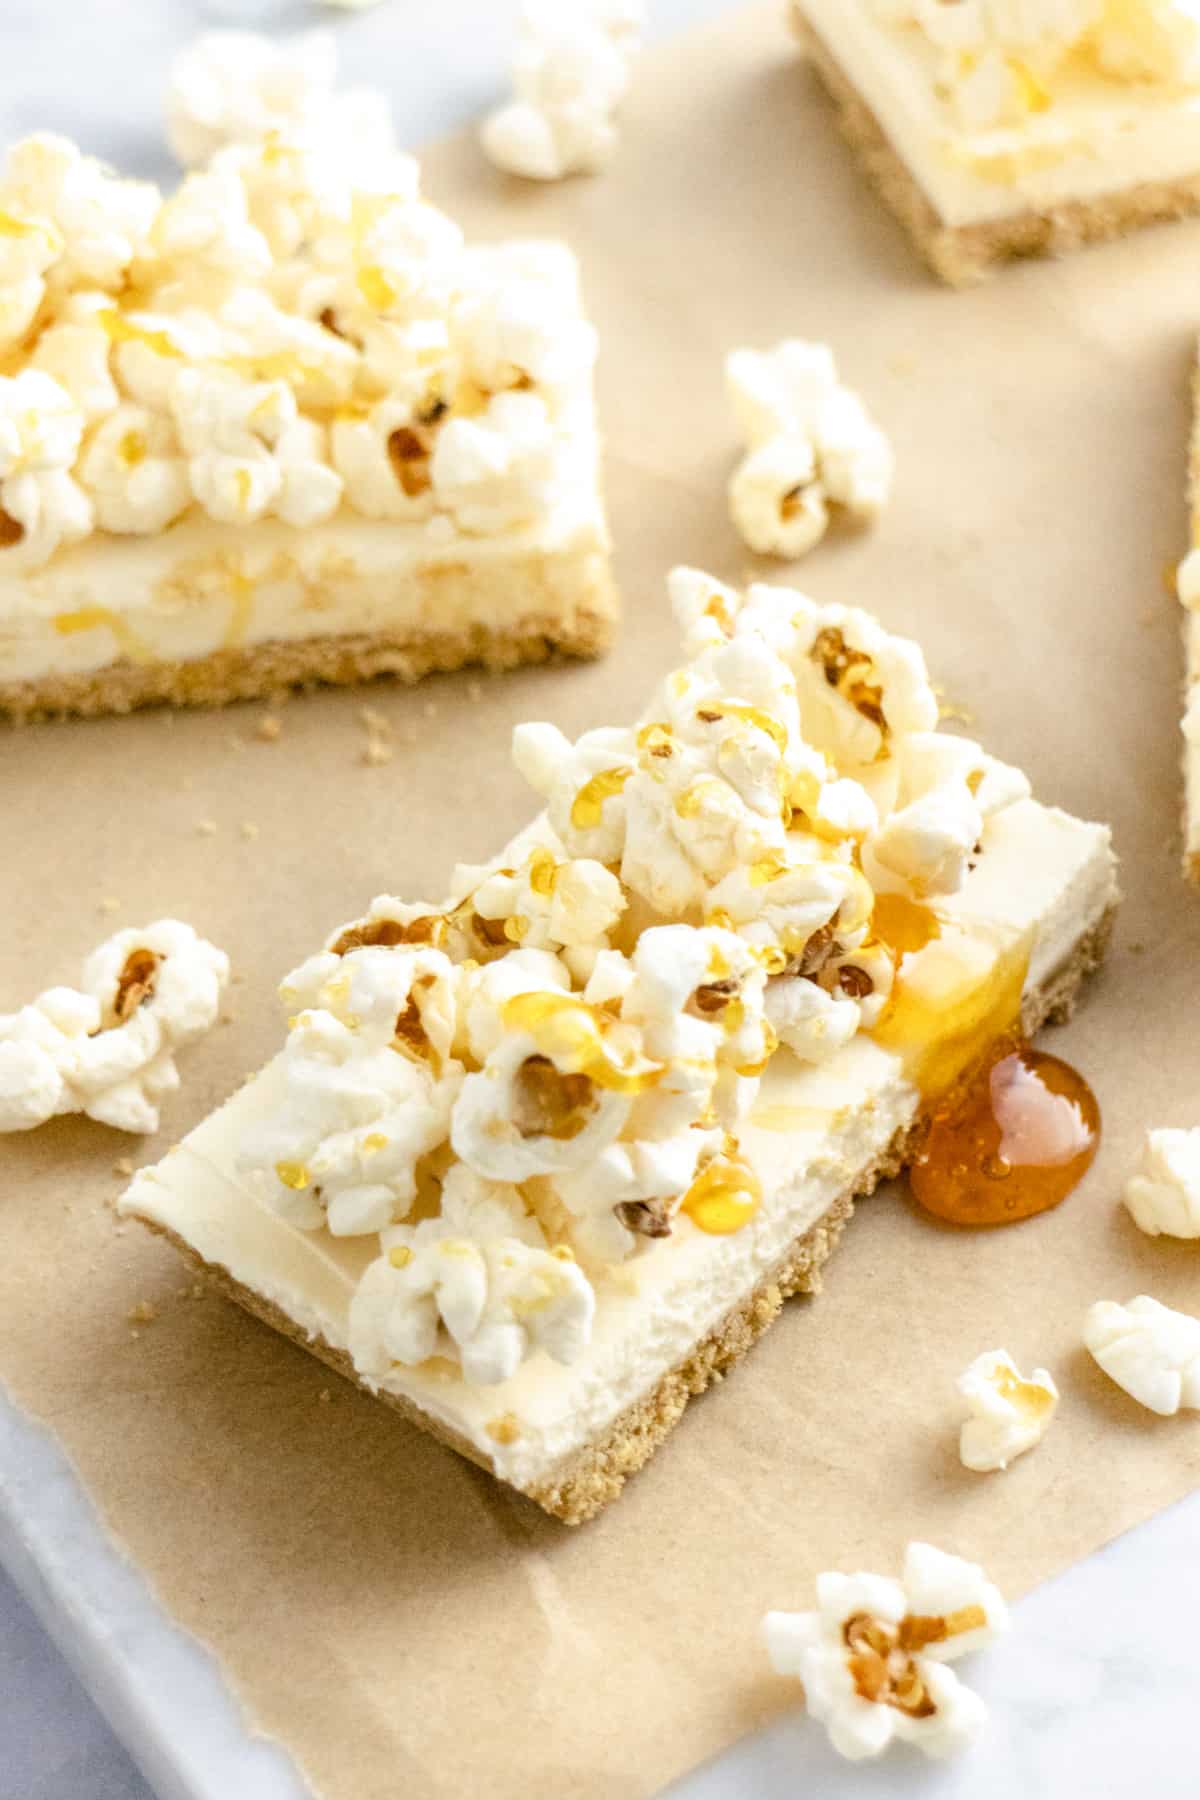 Popcorn cheesecake bar drizzled with caramel sauce